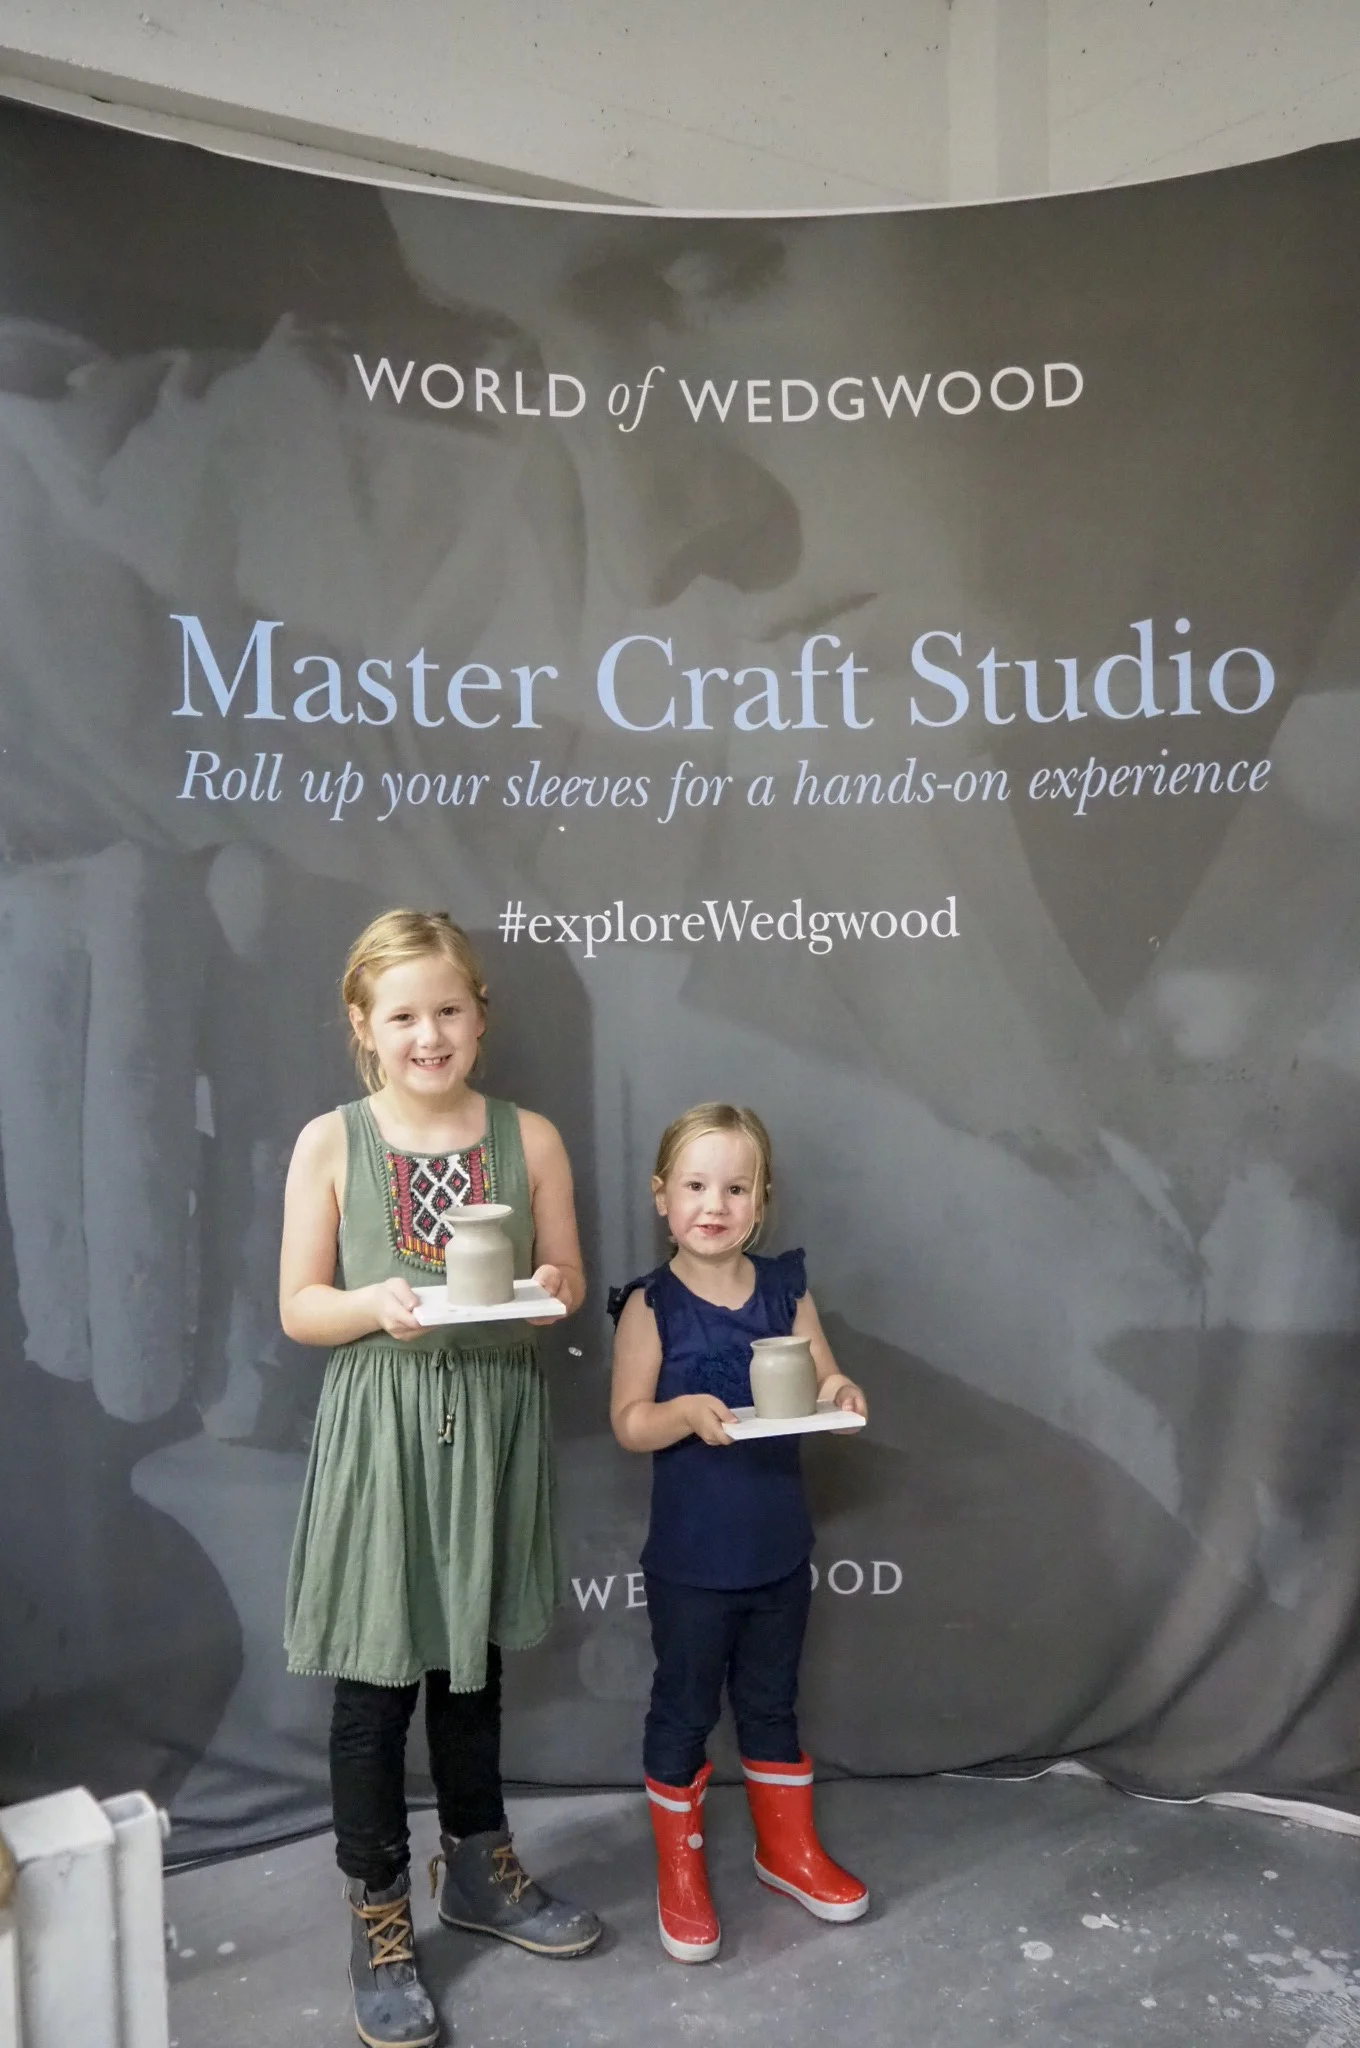 A Visit to the World of Wedgwood with Kids: Review